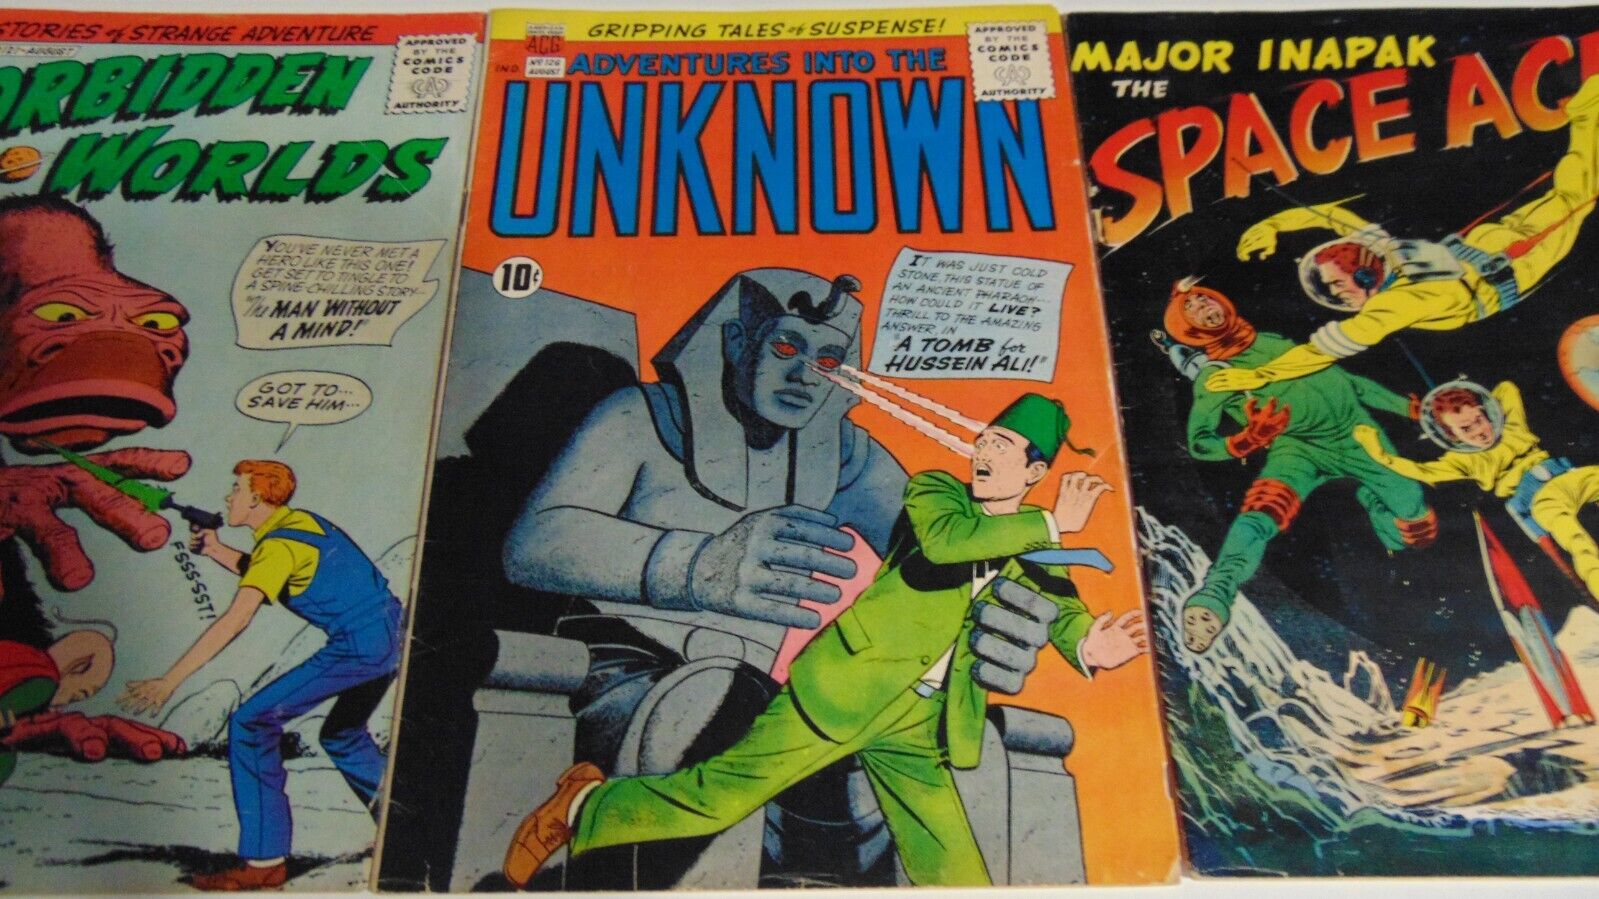 ACG Adventures Into The Unknown #126 + FORBIDDEN WORLD #121 +SPACE ACE #1 LOT -3